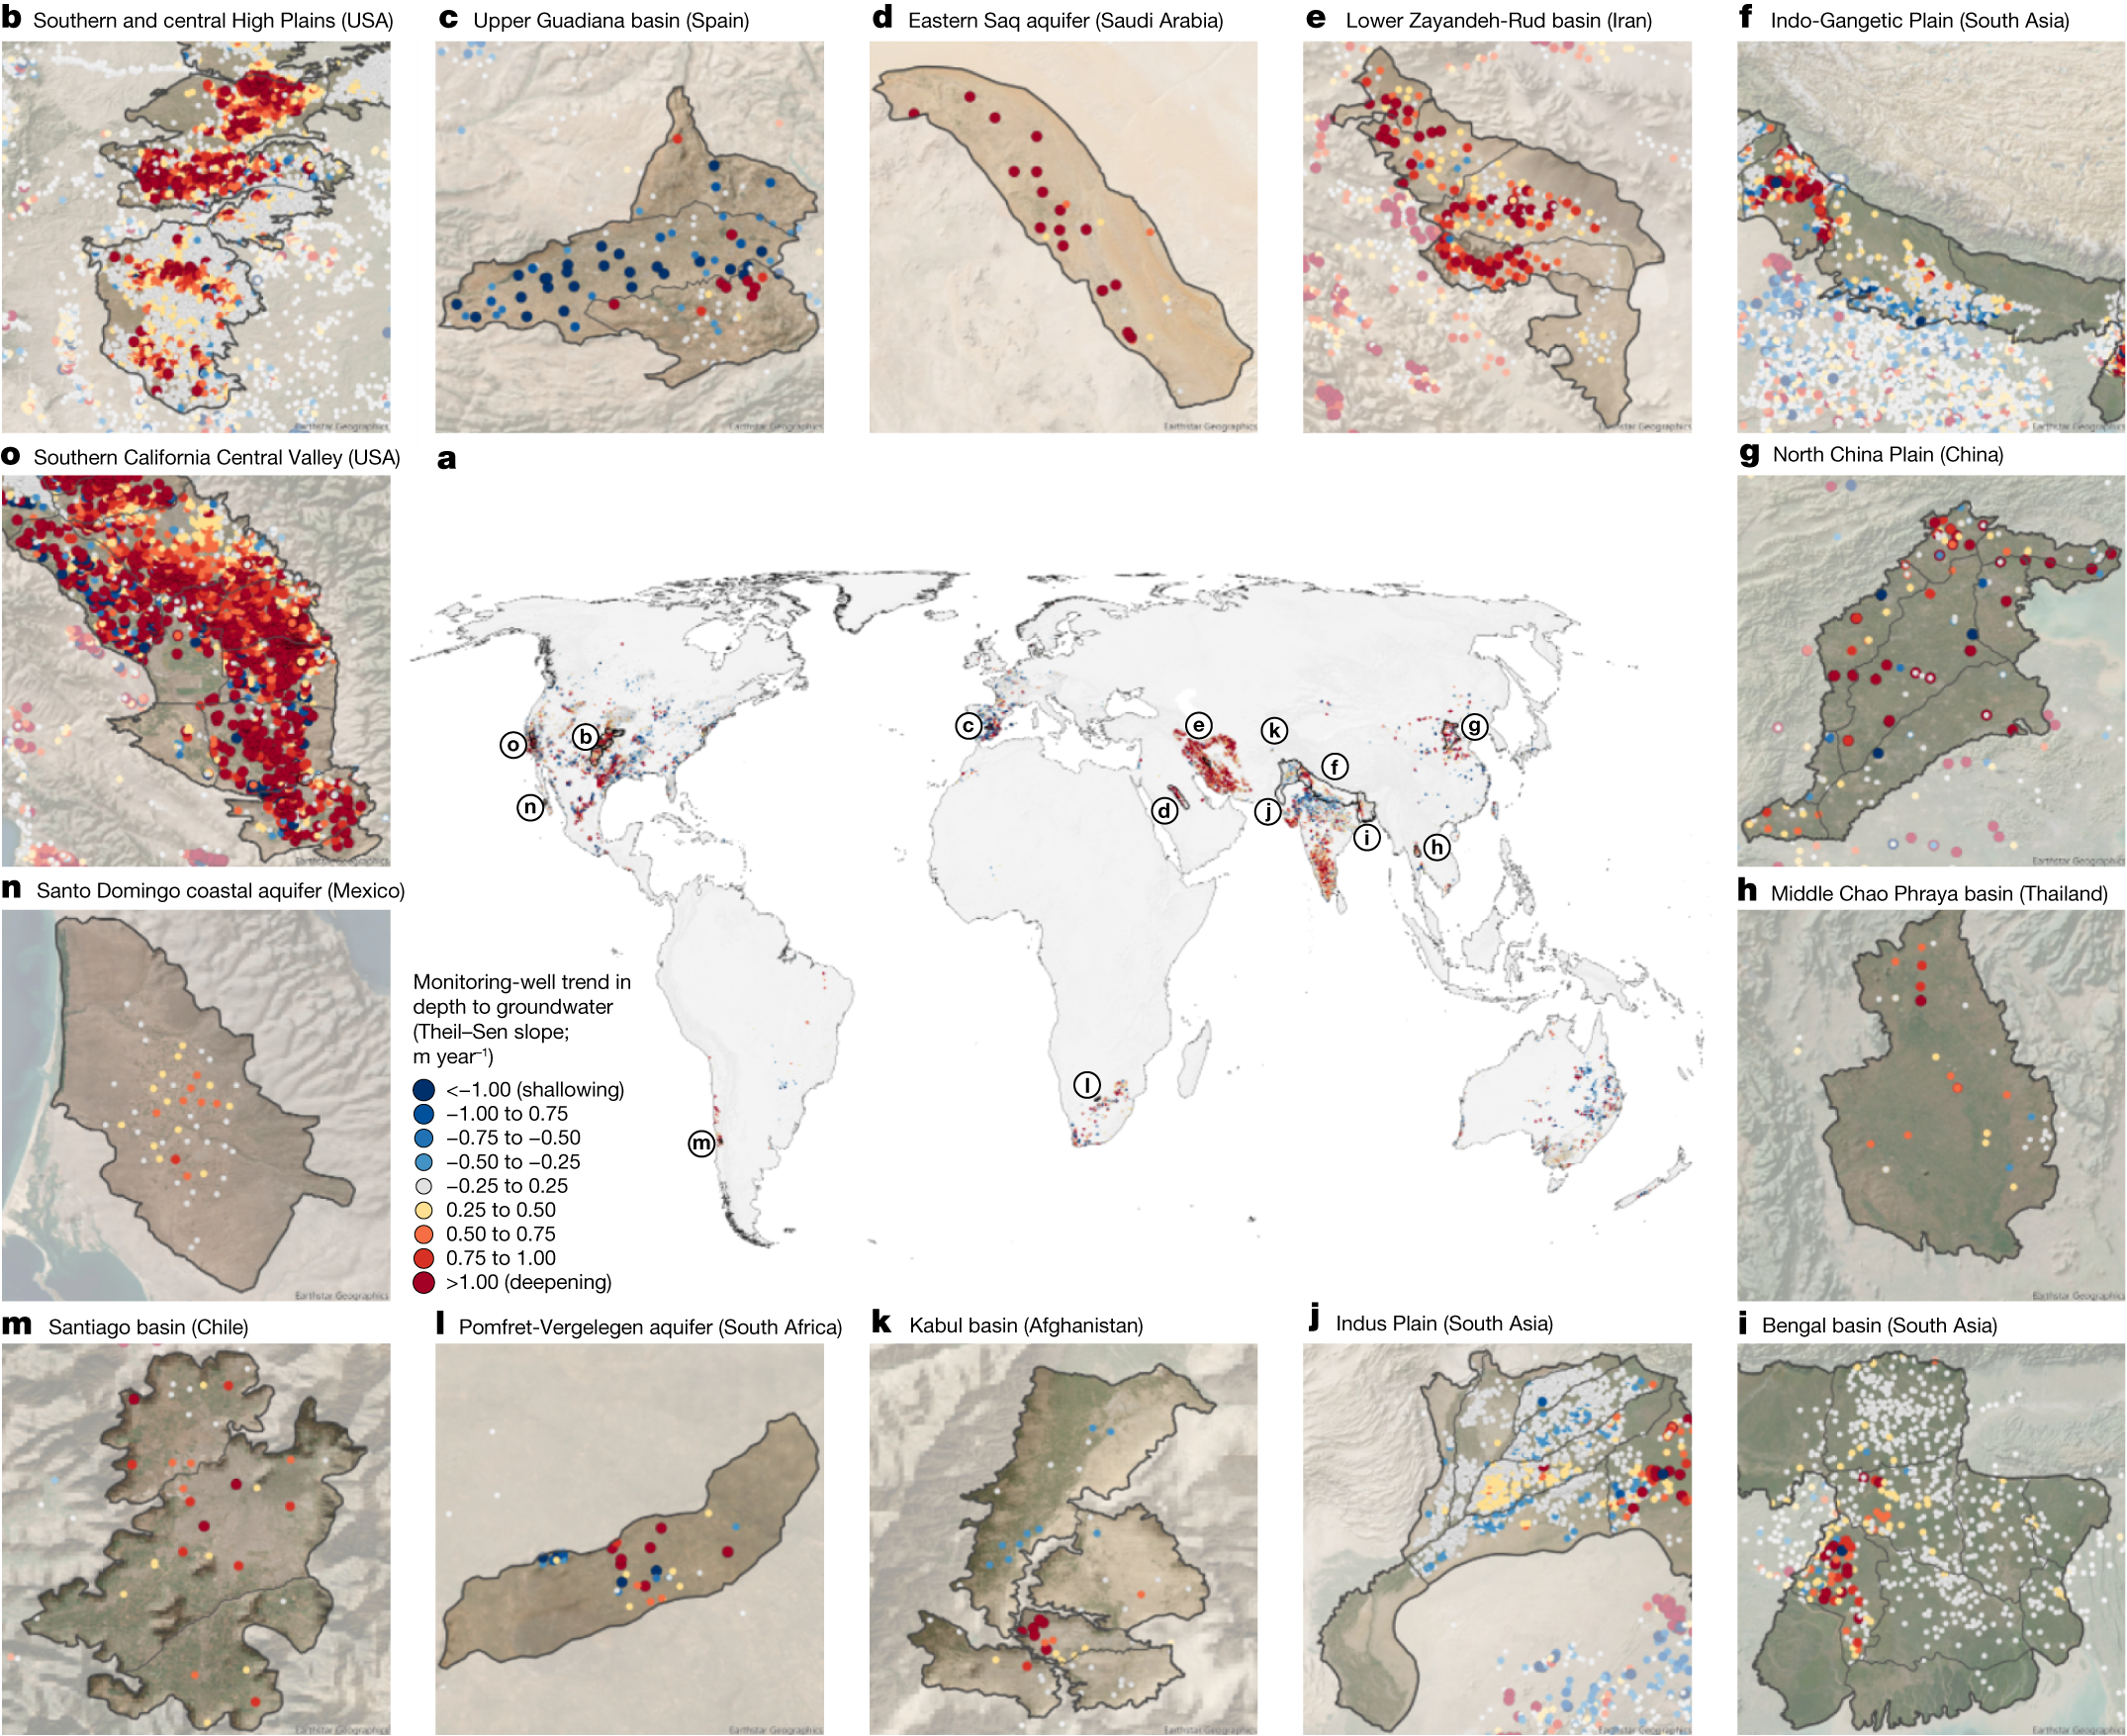 Rapid groundwater decline and some cases of recovery in aquifers globally |  Nature